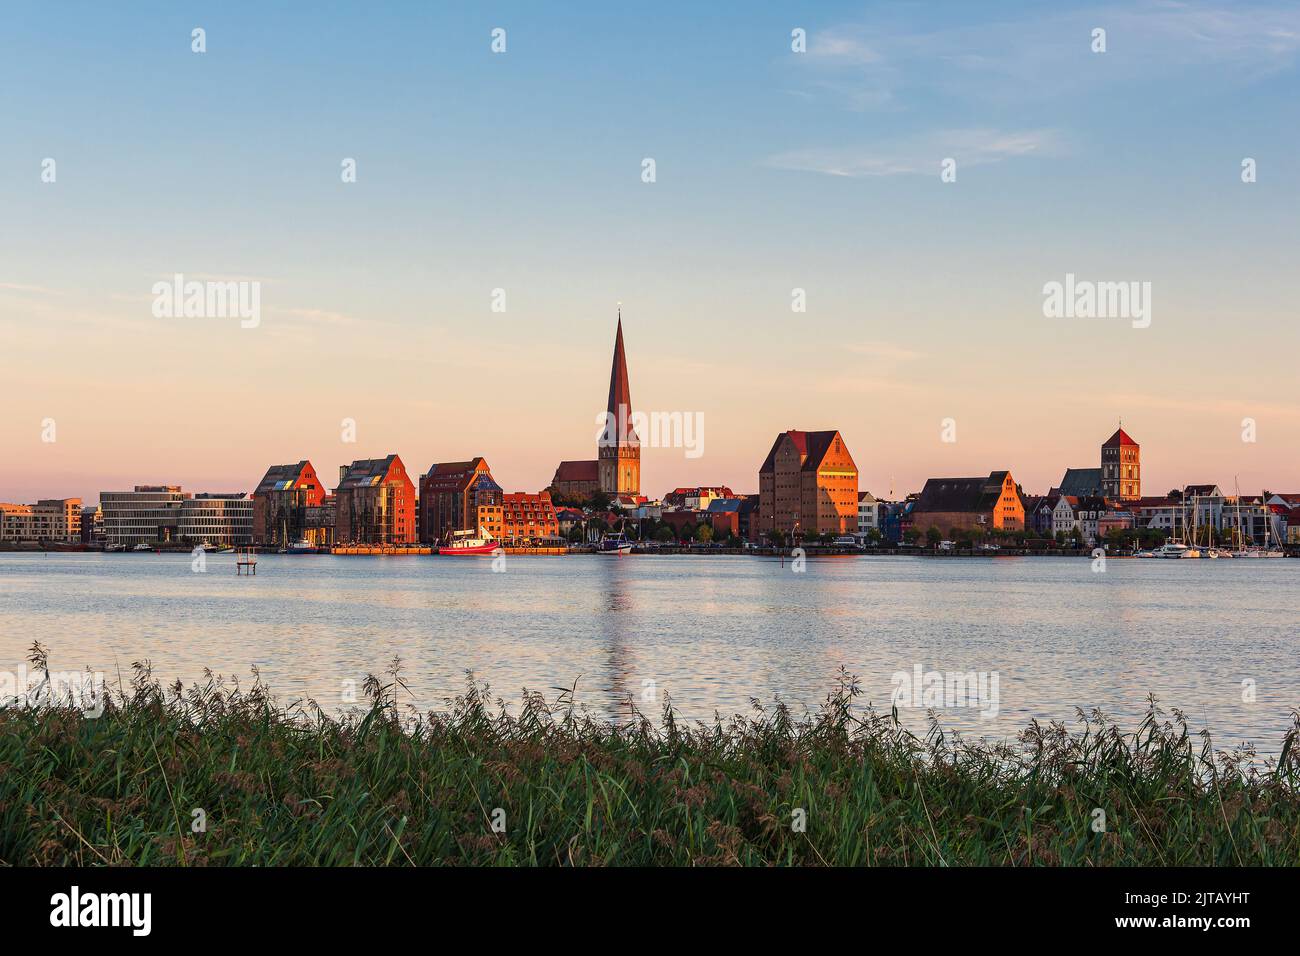 View over the river Warnow to the city Rostock, Germany. Stock Photo